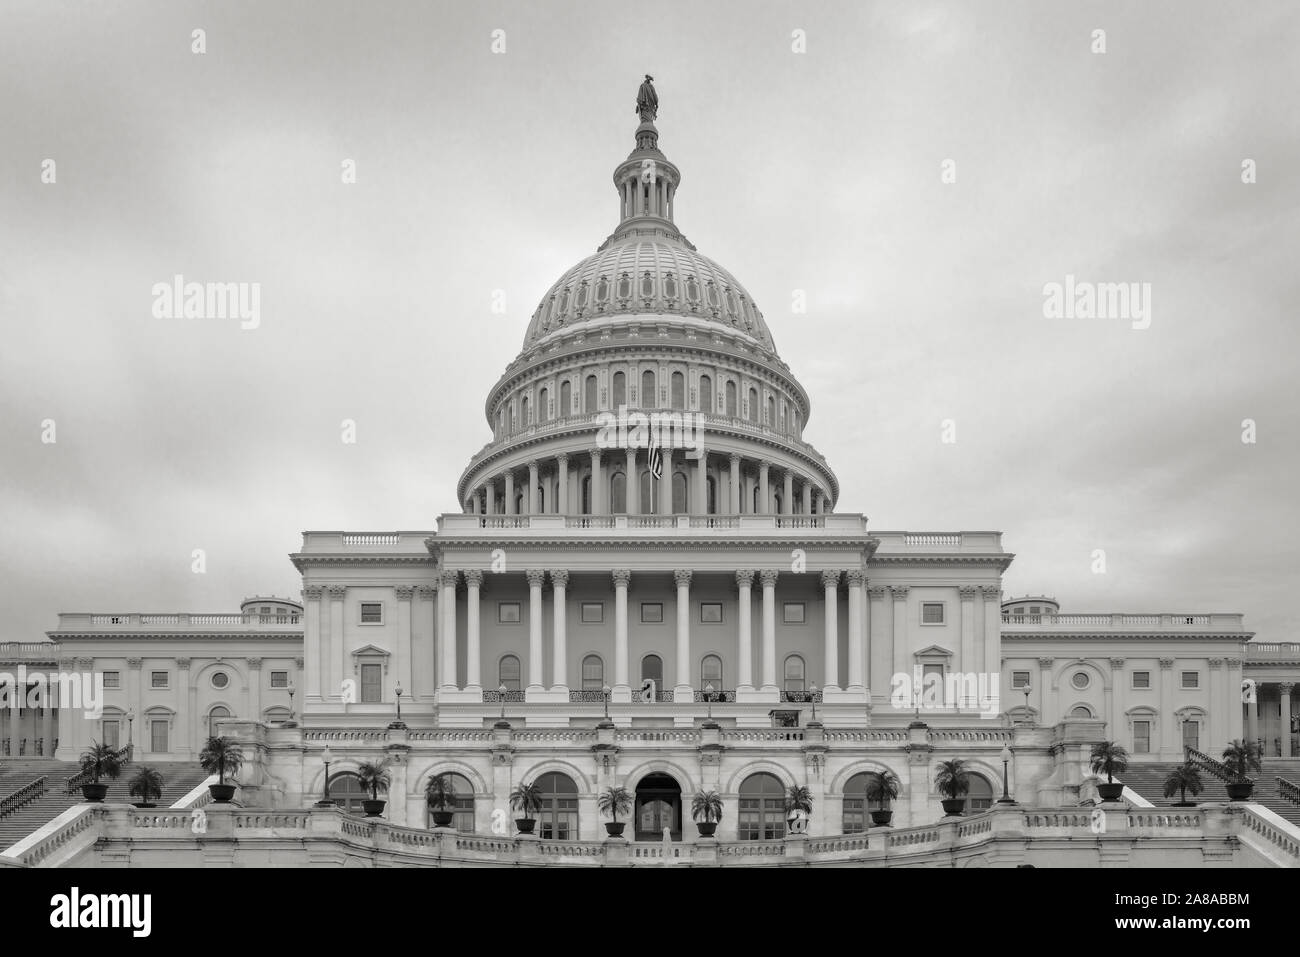 Western face of the US Capitol Building on a stormy day in black & white. Stock Photo